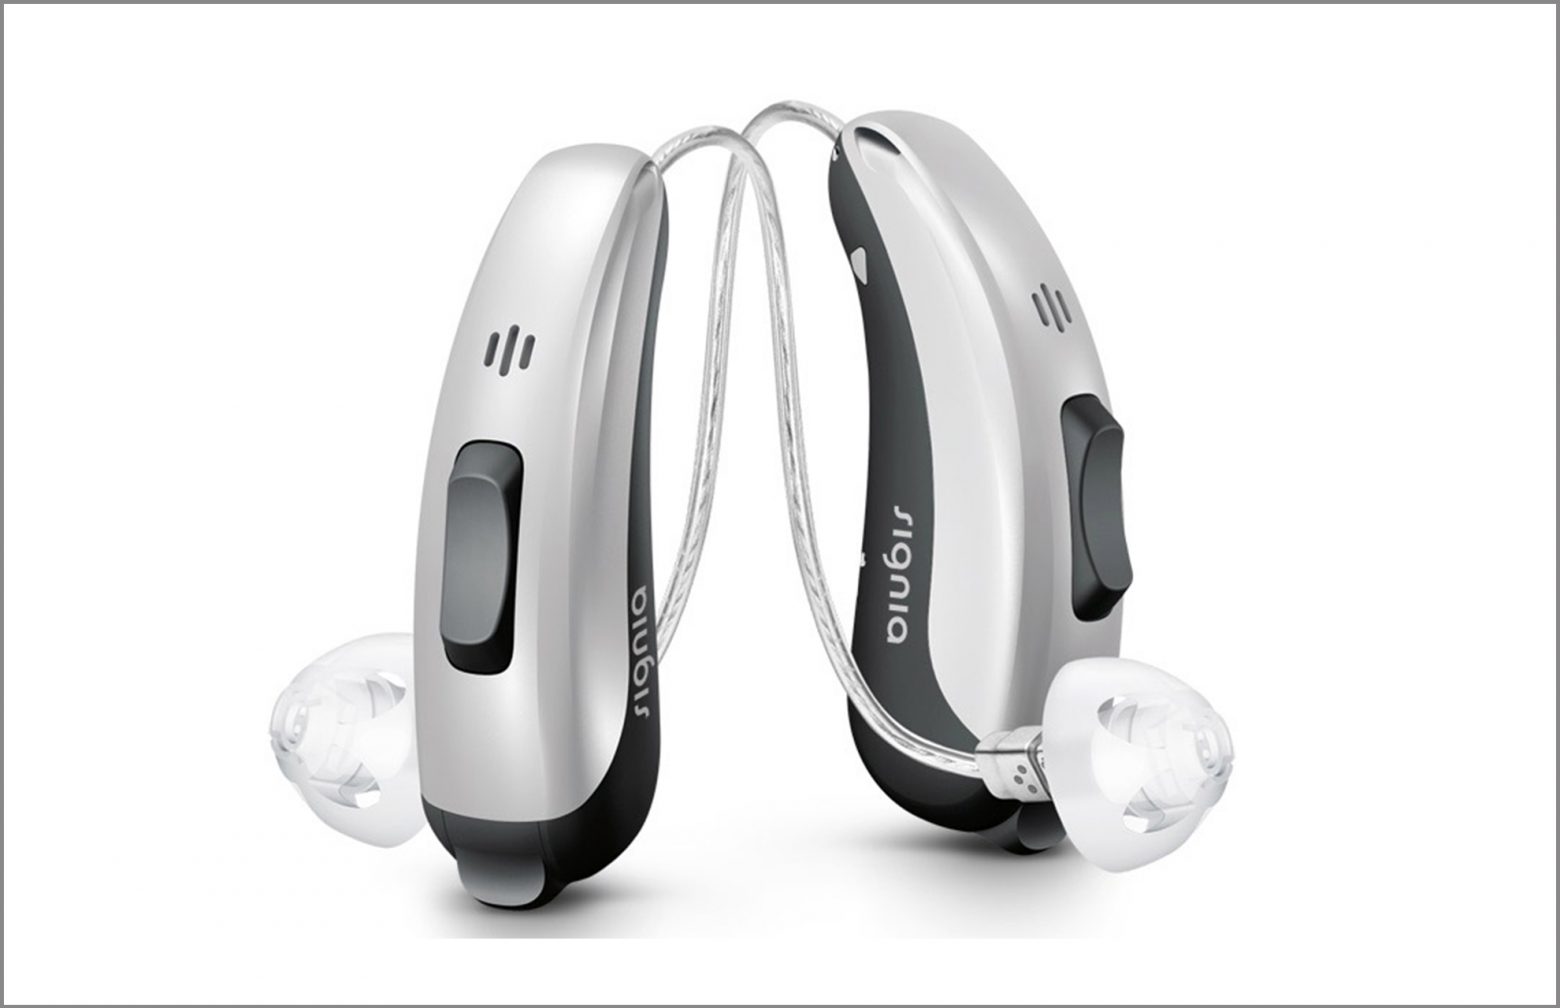 Pair of hearing aids